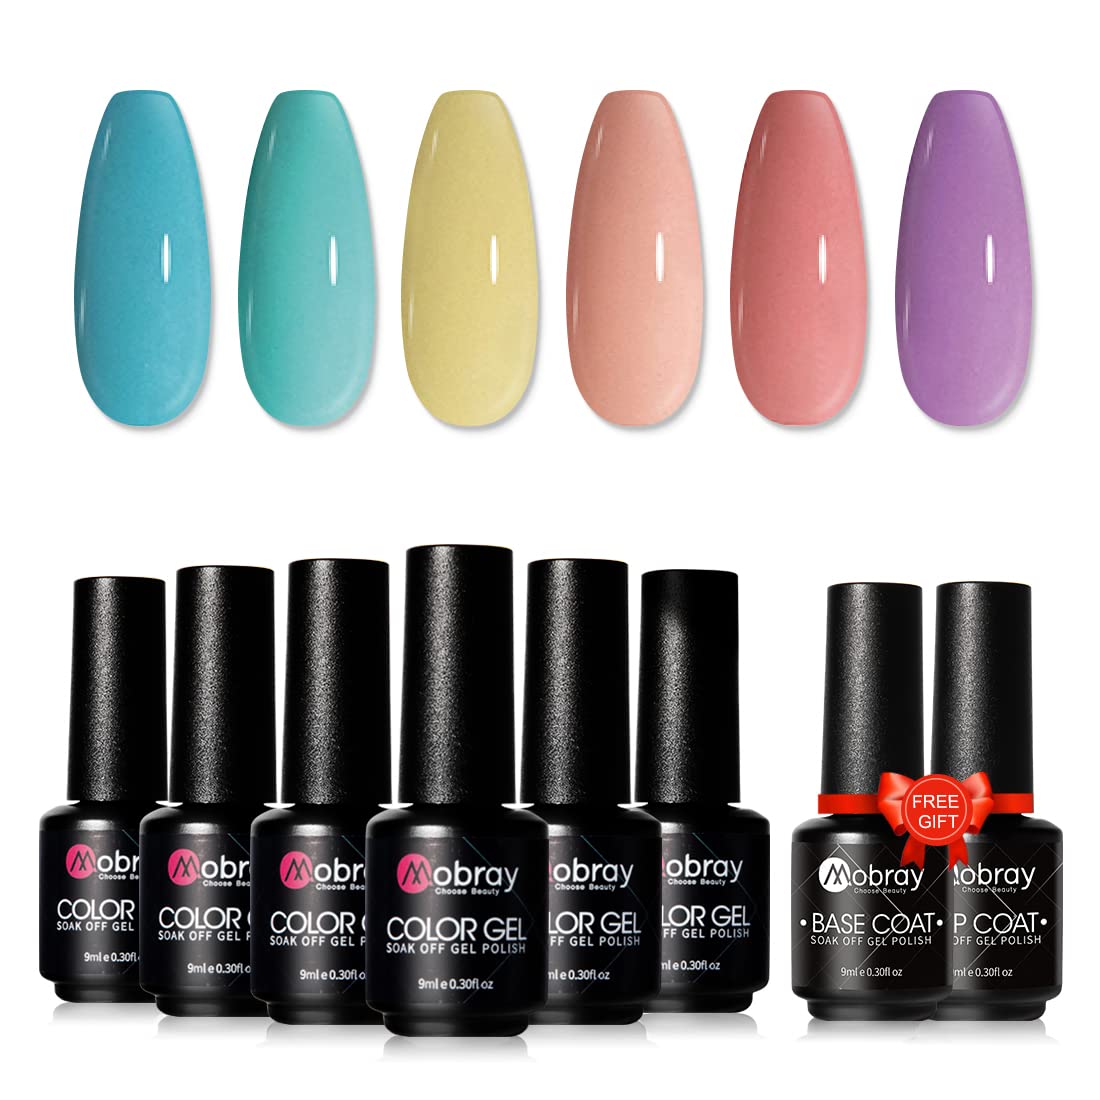 Mobray Gel Nail Polish Set, 6 Spring Summer Blue Nude Purple Colors With No Wipe Top Coat And Base Coat for Nail Art Manicure.